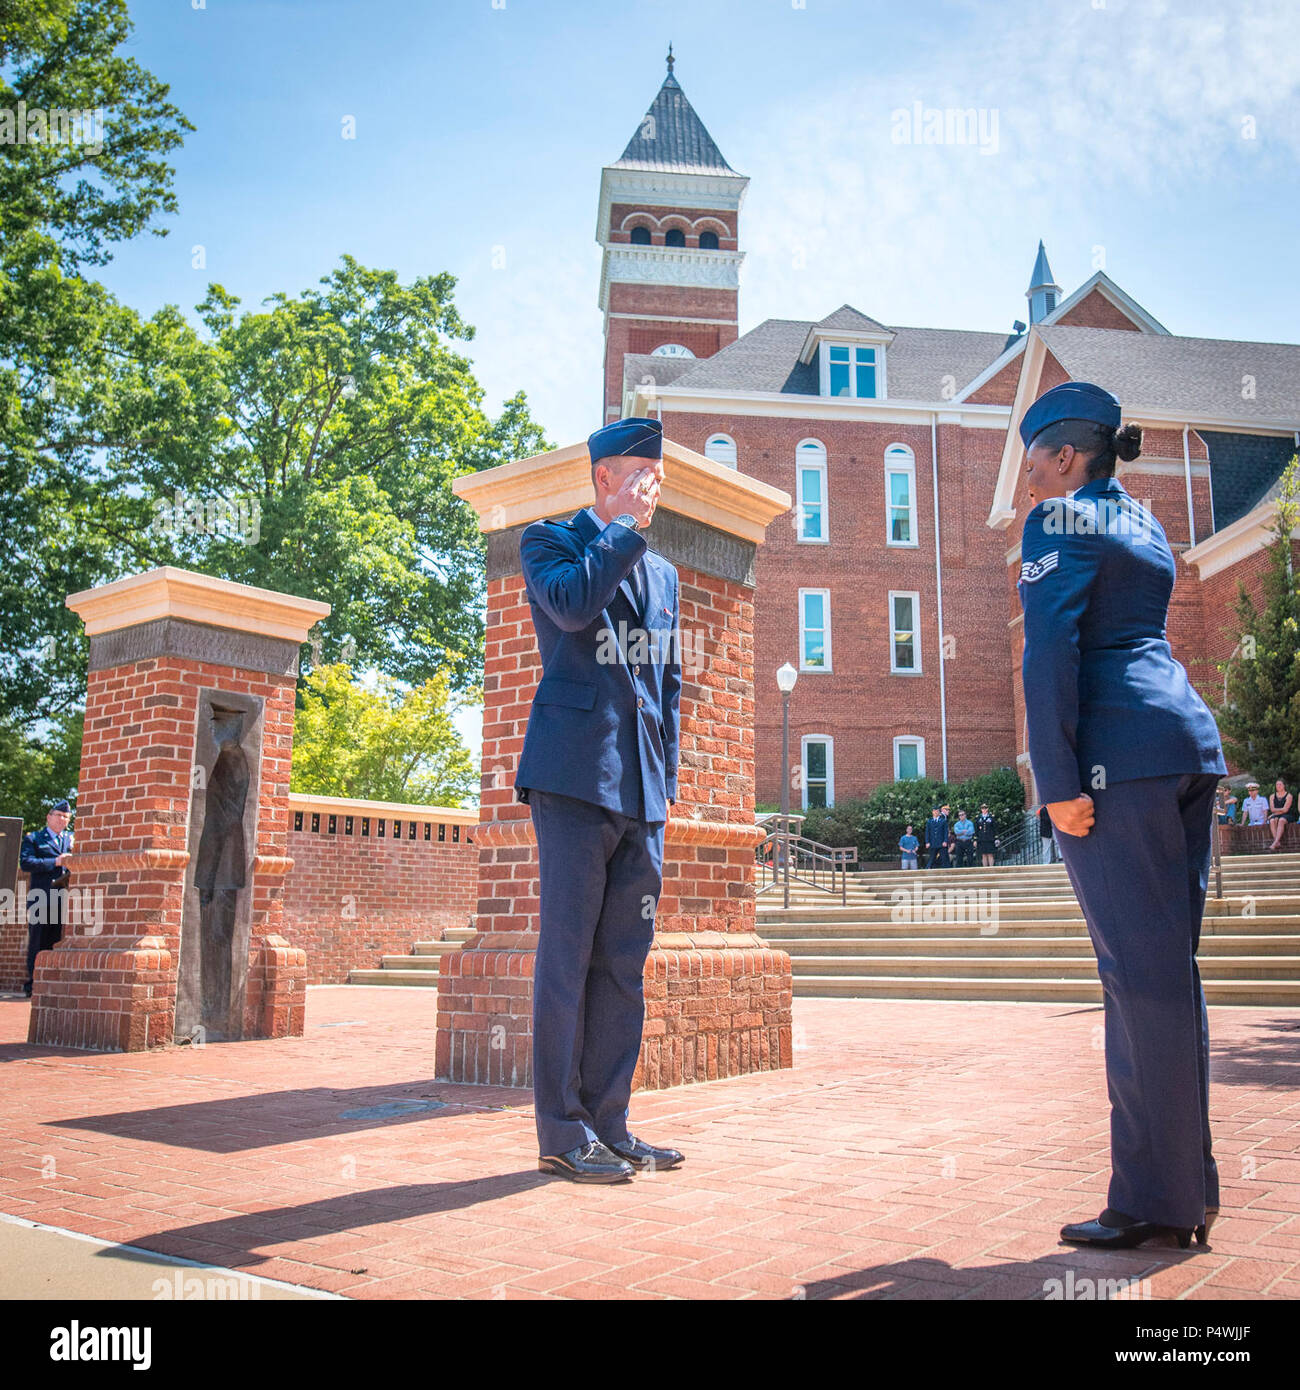 Newly-commissioned U.S. Air Force 2nd Lt. Sean Mac Lain (left) recieves his first salute during a Silver Dollar Ceremony after the Clemson University Reserve Officers’ Training Corps commissioning ceremony, May 10, 2017. Mac Lain was a member of both the 2016 Clemson football National Championship team and the Clemson Pershing Rifles 2016 National Champion drill and ceremony squad. Stock Photo